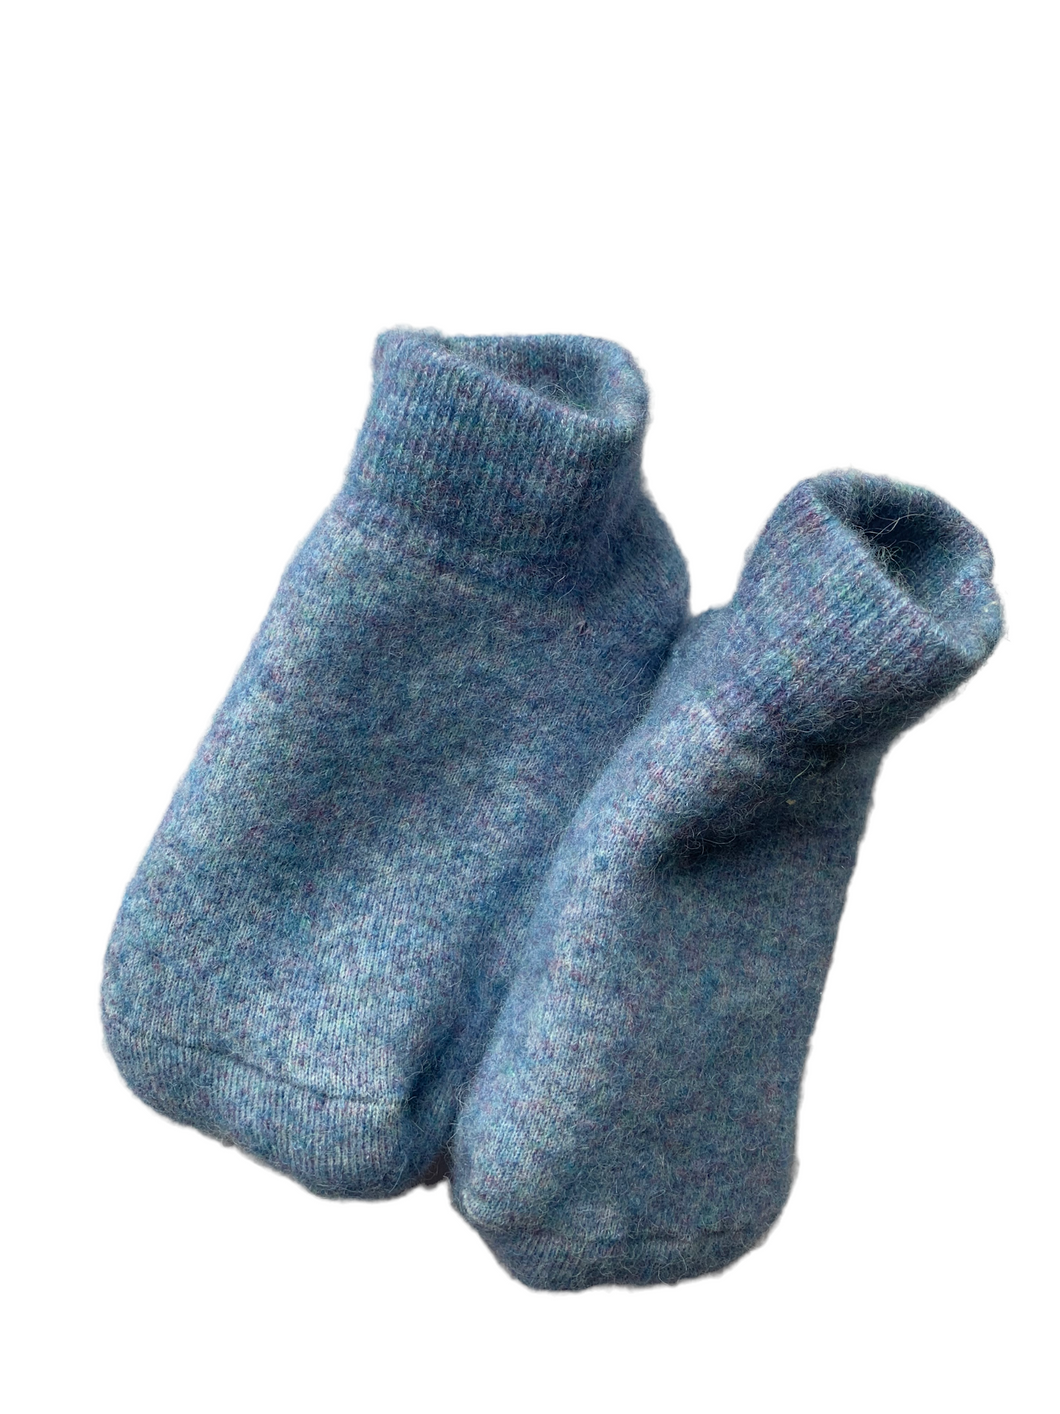 Super Soft Alpaca Blue Non Slip Gripper Slipper Socks, Alpaca Socks for Him/Her, Super Warm Slippers, House Shoes, Gift for Her, Christmas Gift